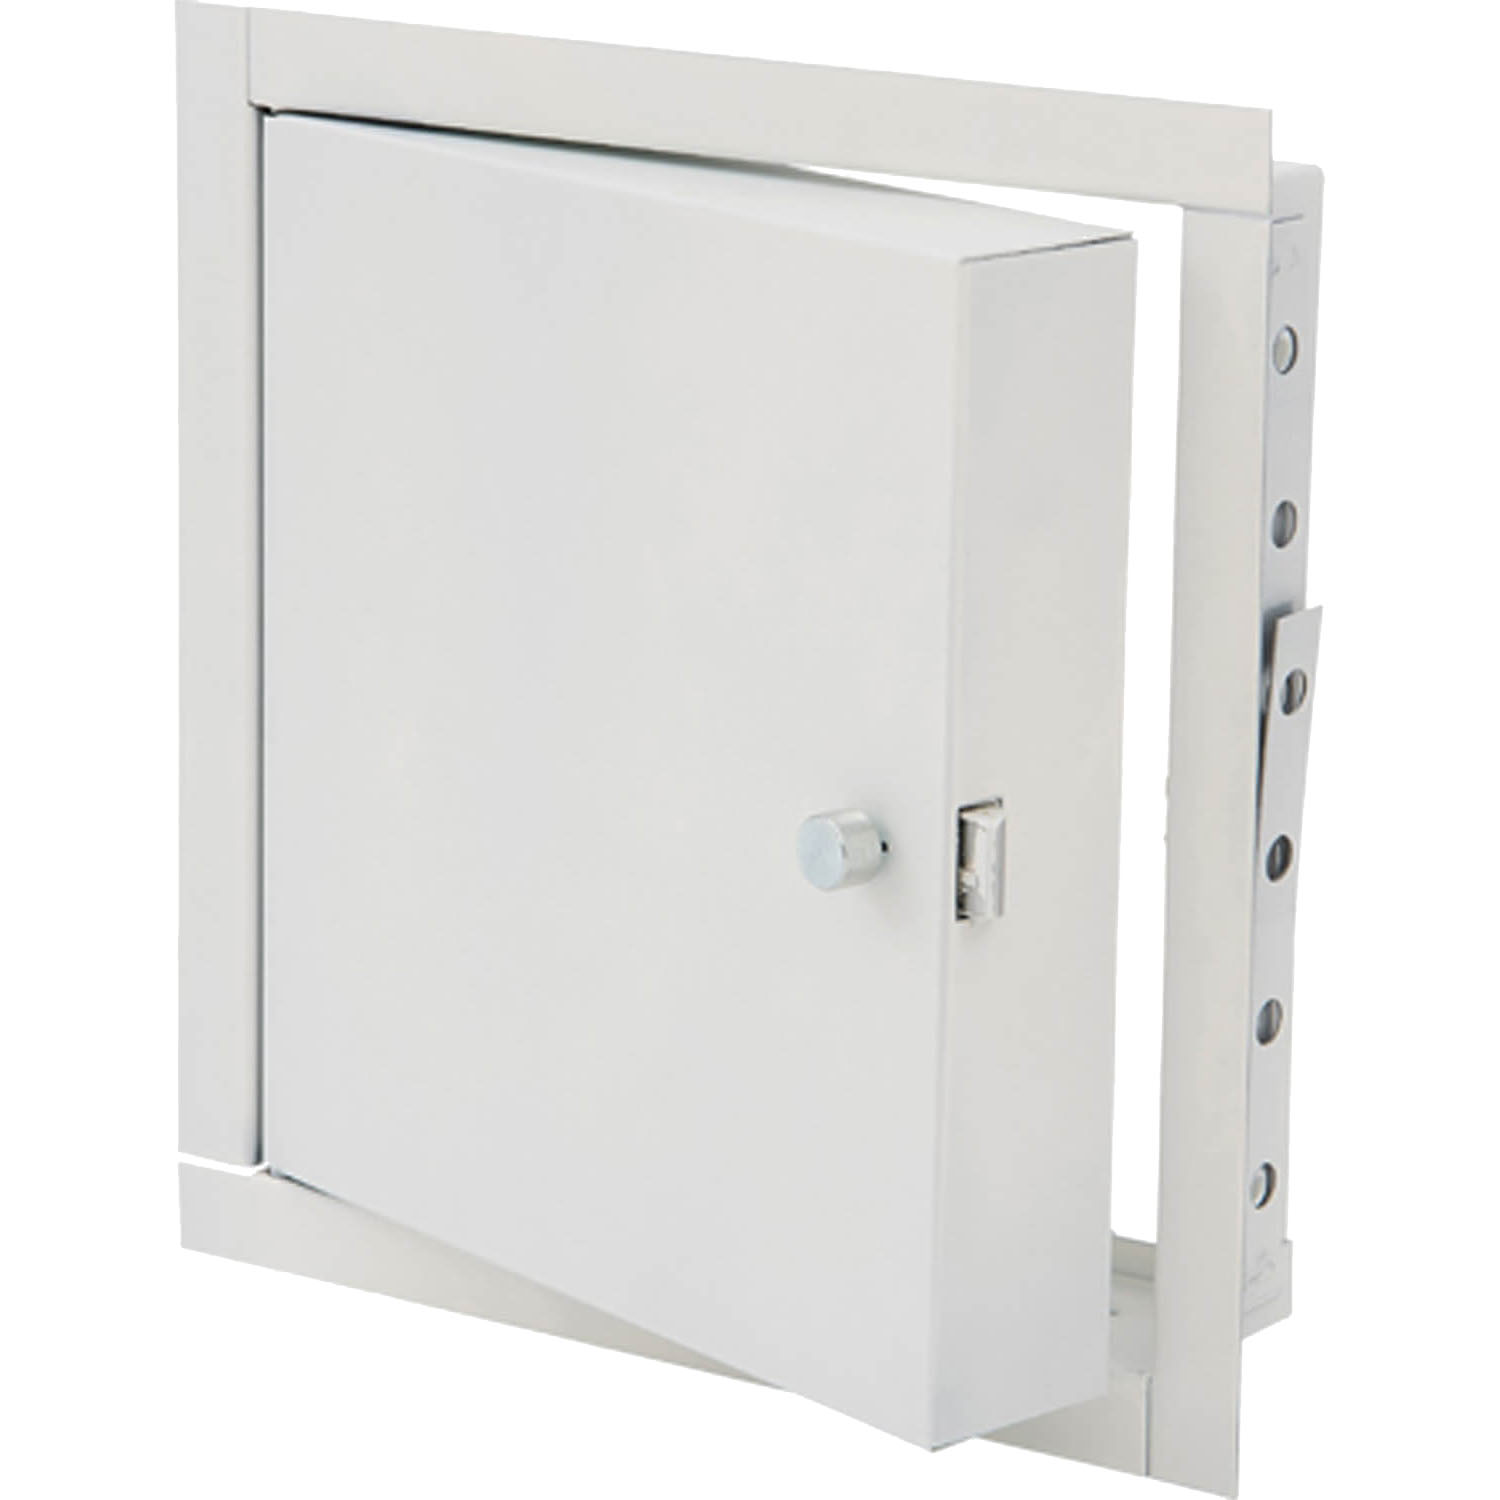 Access Door - E-FRC 12" x 12" Insulated Fire Rated for Ceilings and Walls